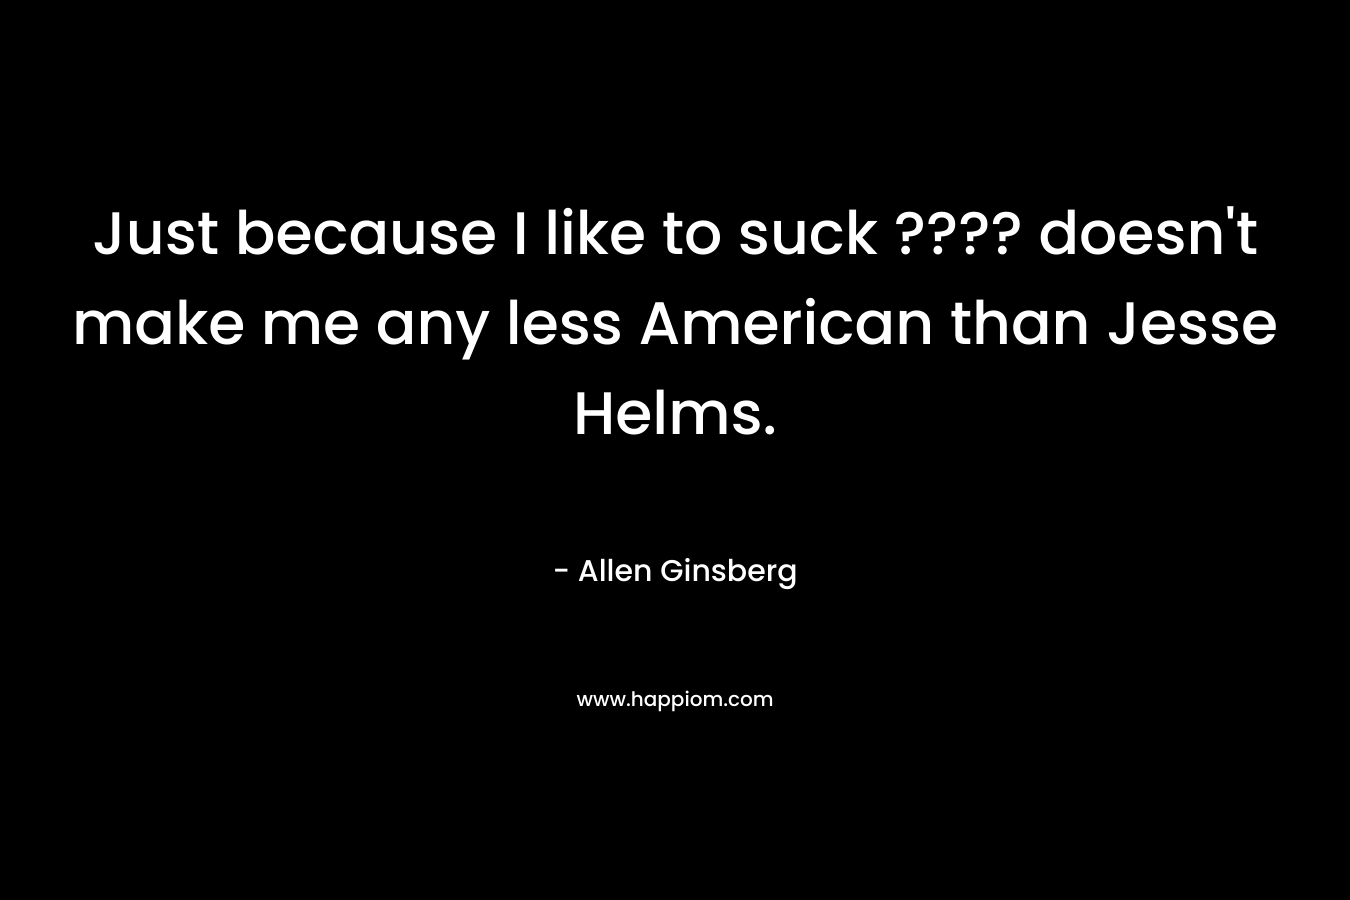 Just because I like to suck ???? doesn't make me any less American than Jesse Helms.